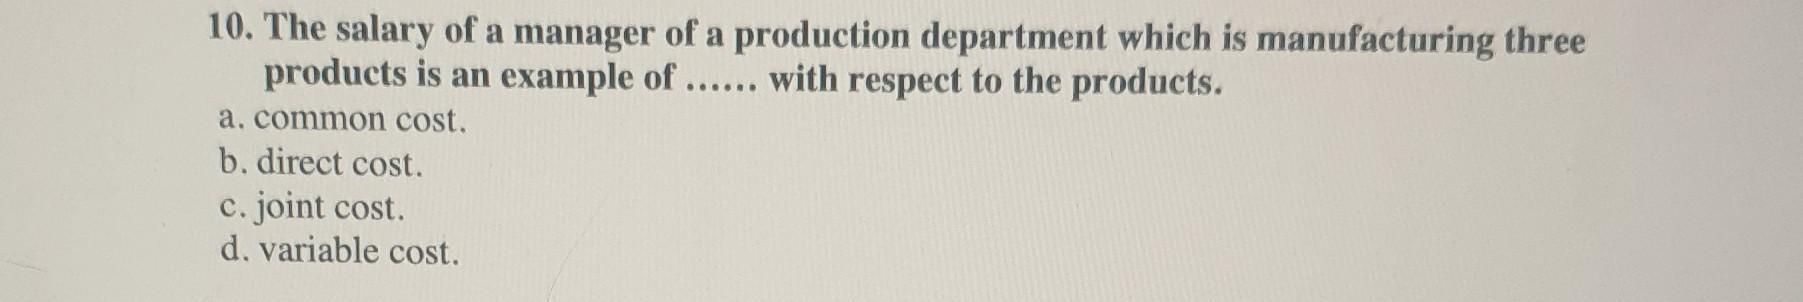 10. The salary of a manager of a production department which is manufacturing threeproducts is an example of ...... with res